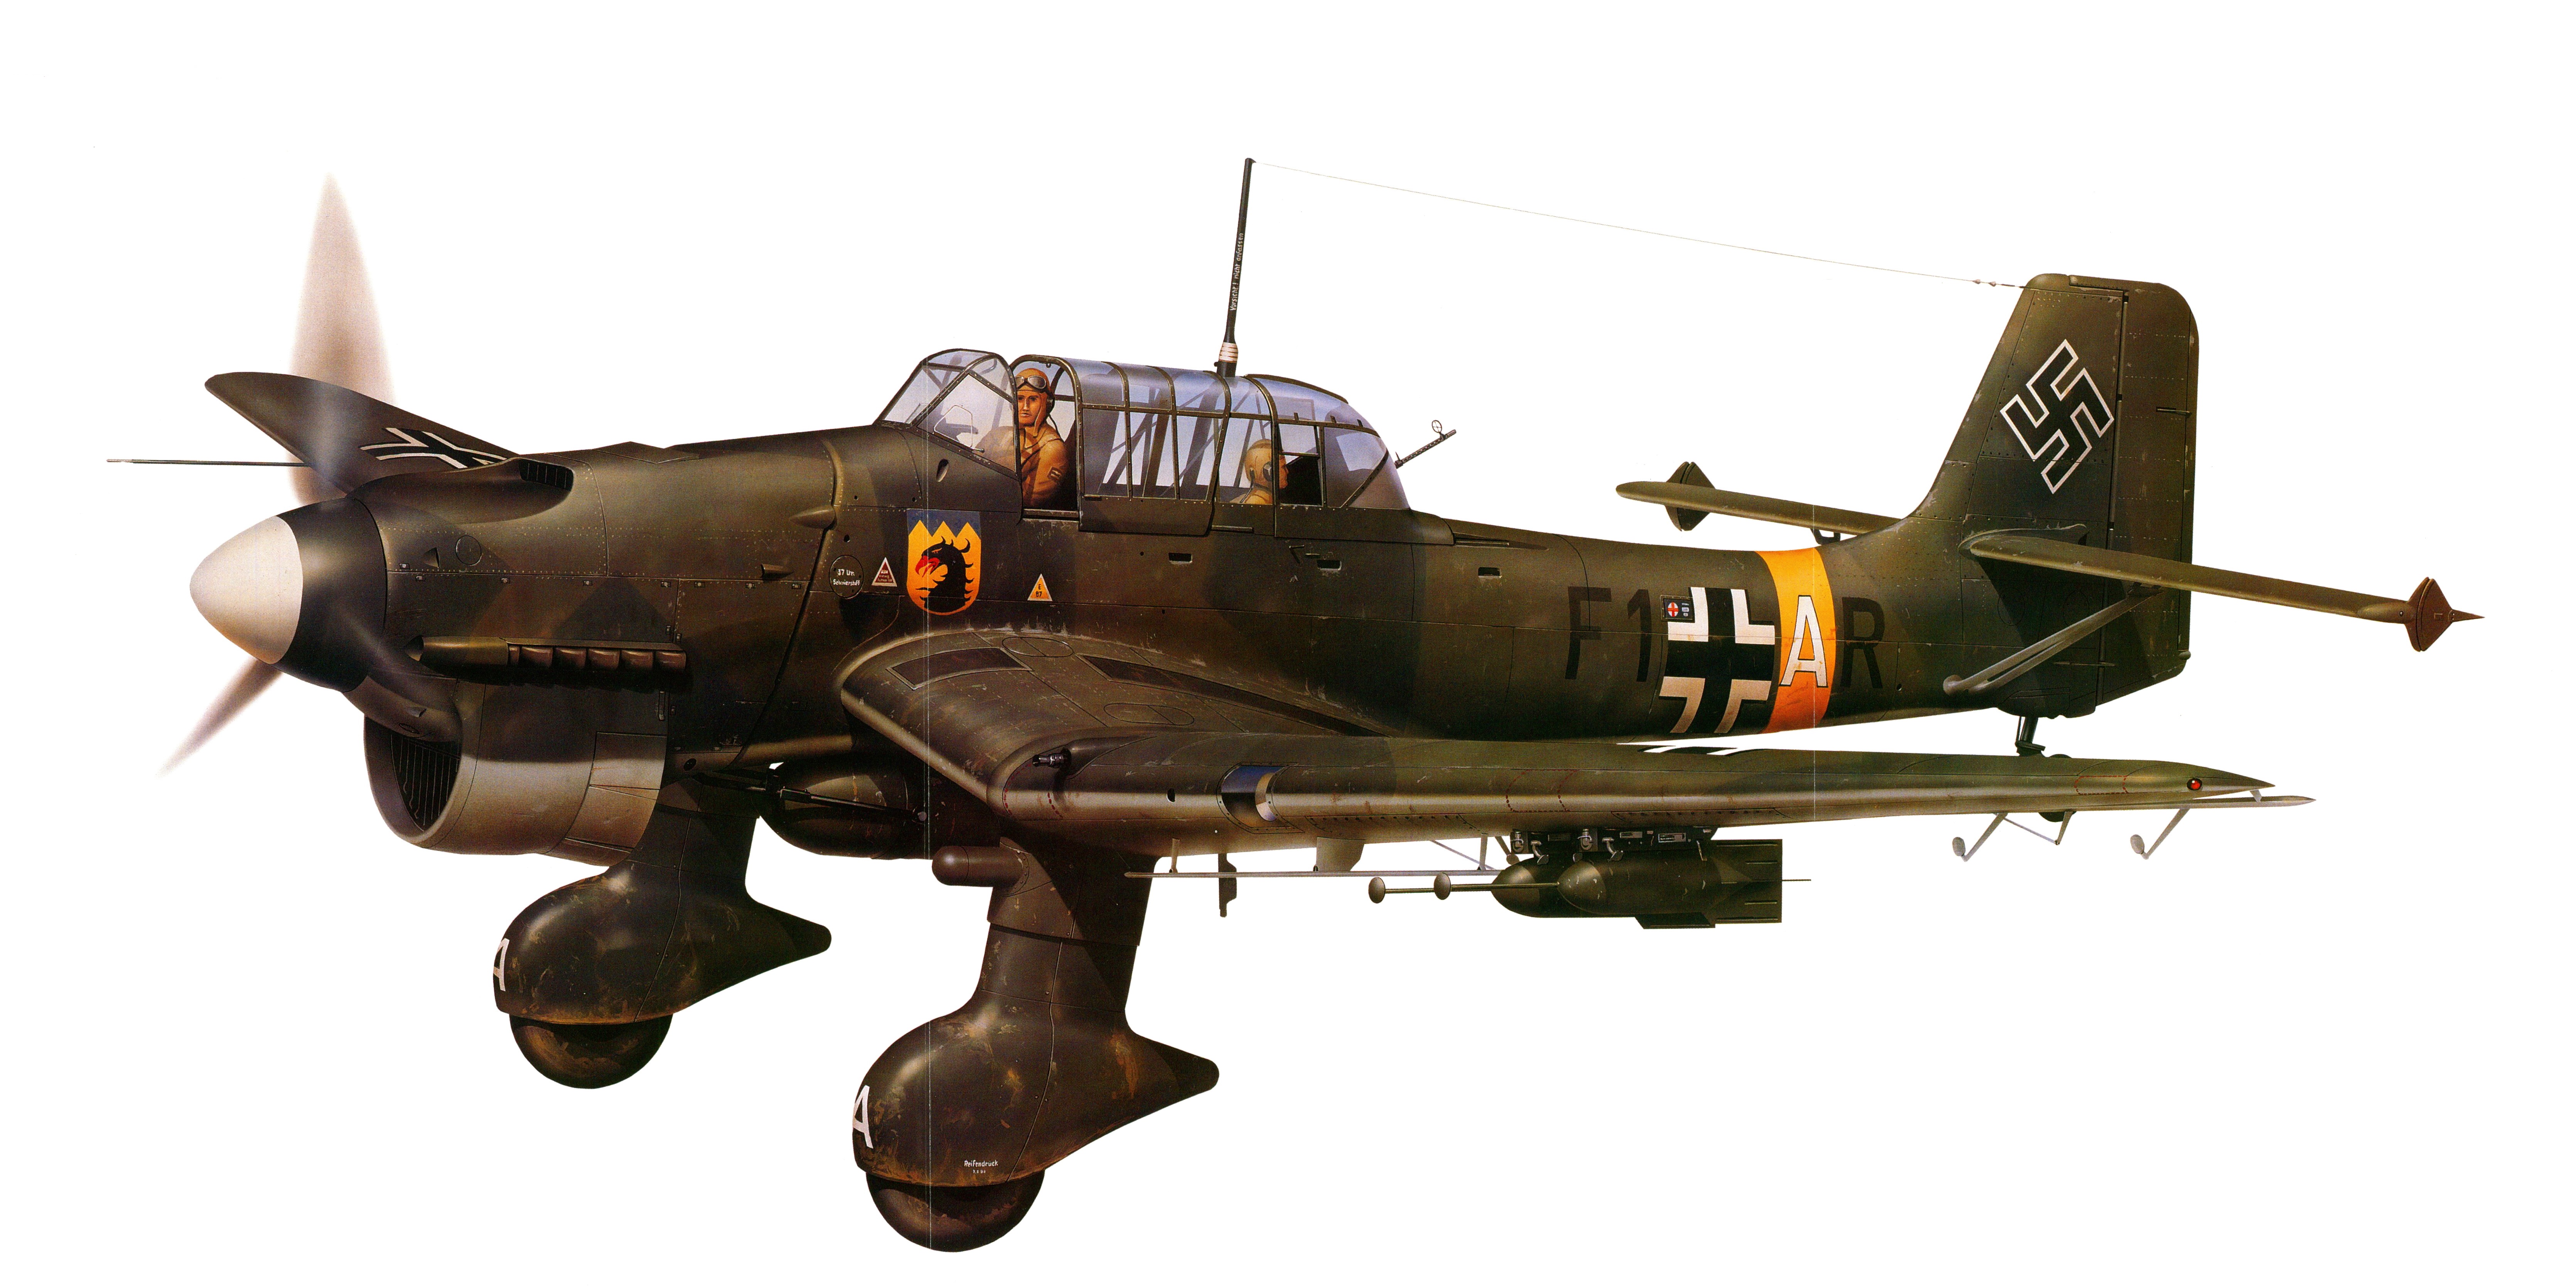 General 6680x3340 World War II military military aircraft aircraft airplane Boxart Junkers Ju-87 Stuka Dive bomber Bomber Luftwaffe Germany white background German aircraft Junkers